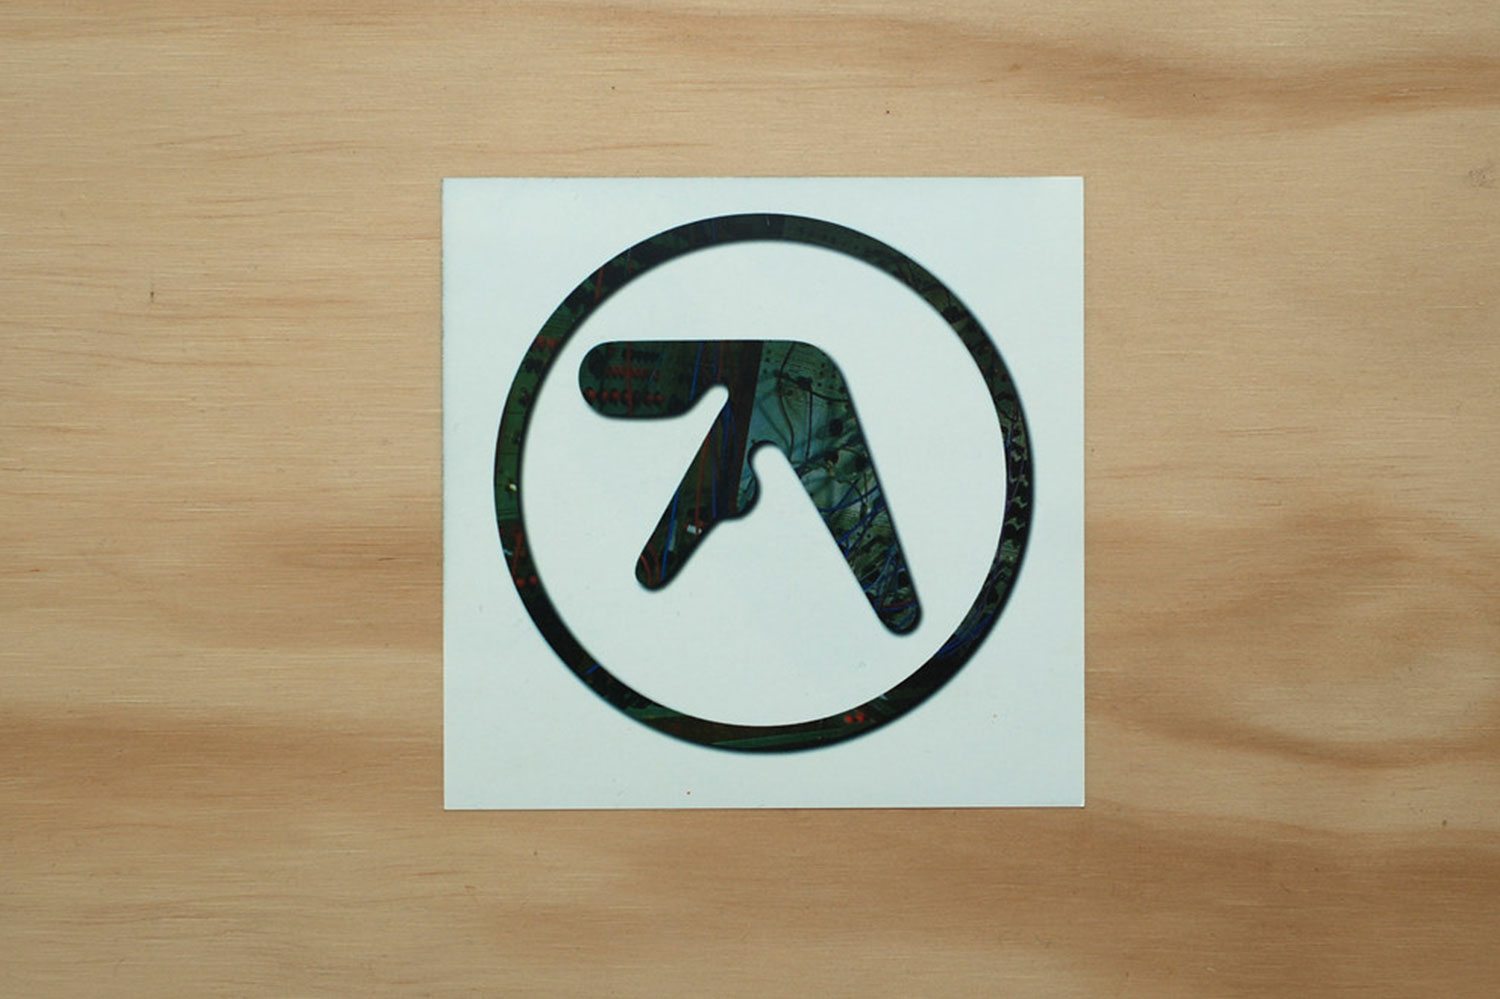 Aphex Twin's trademark logo with a wooden background